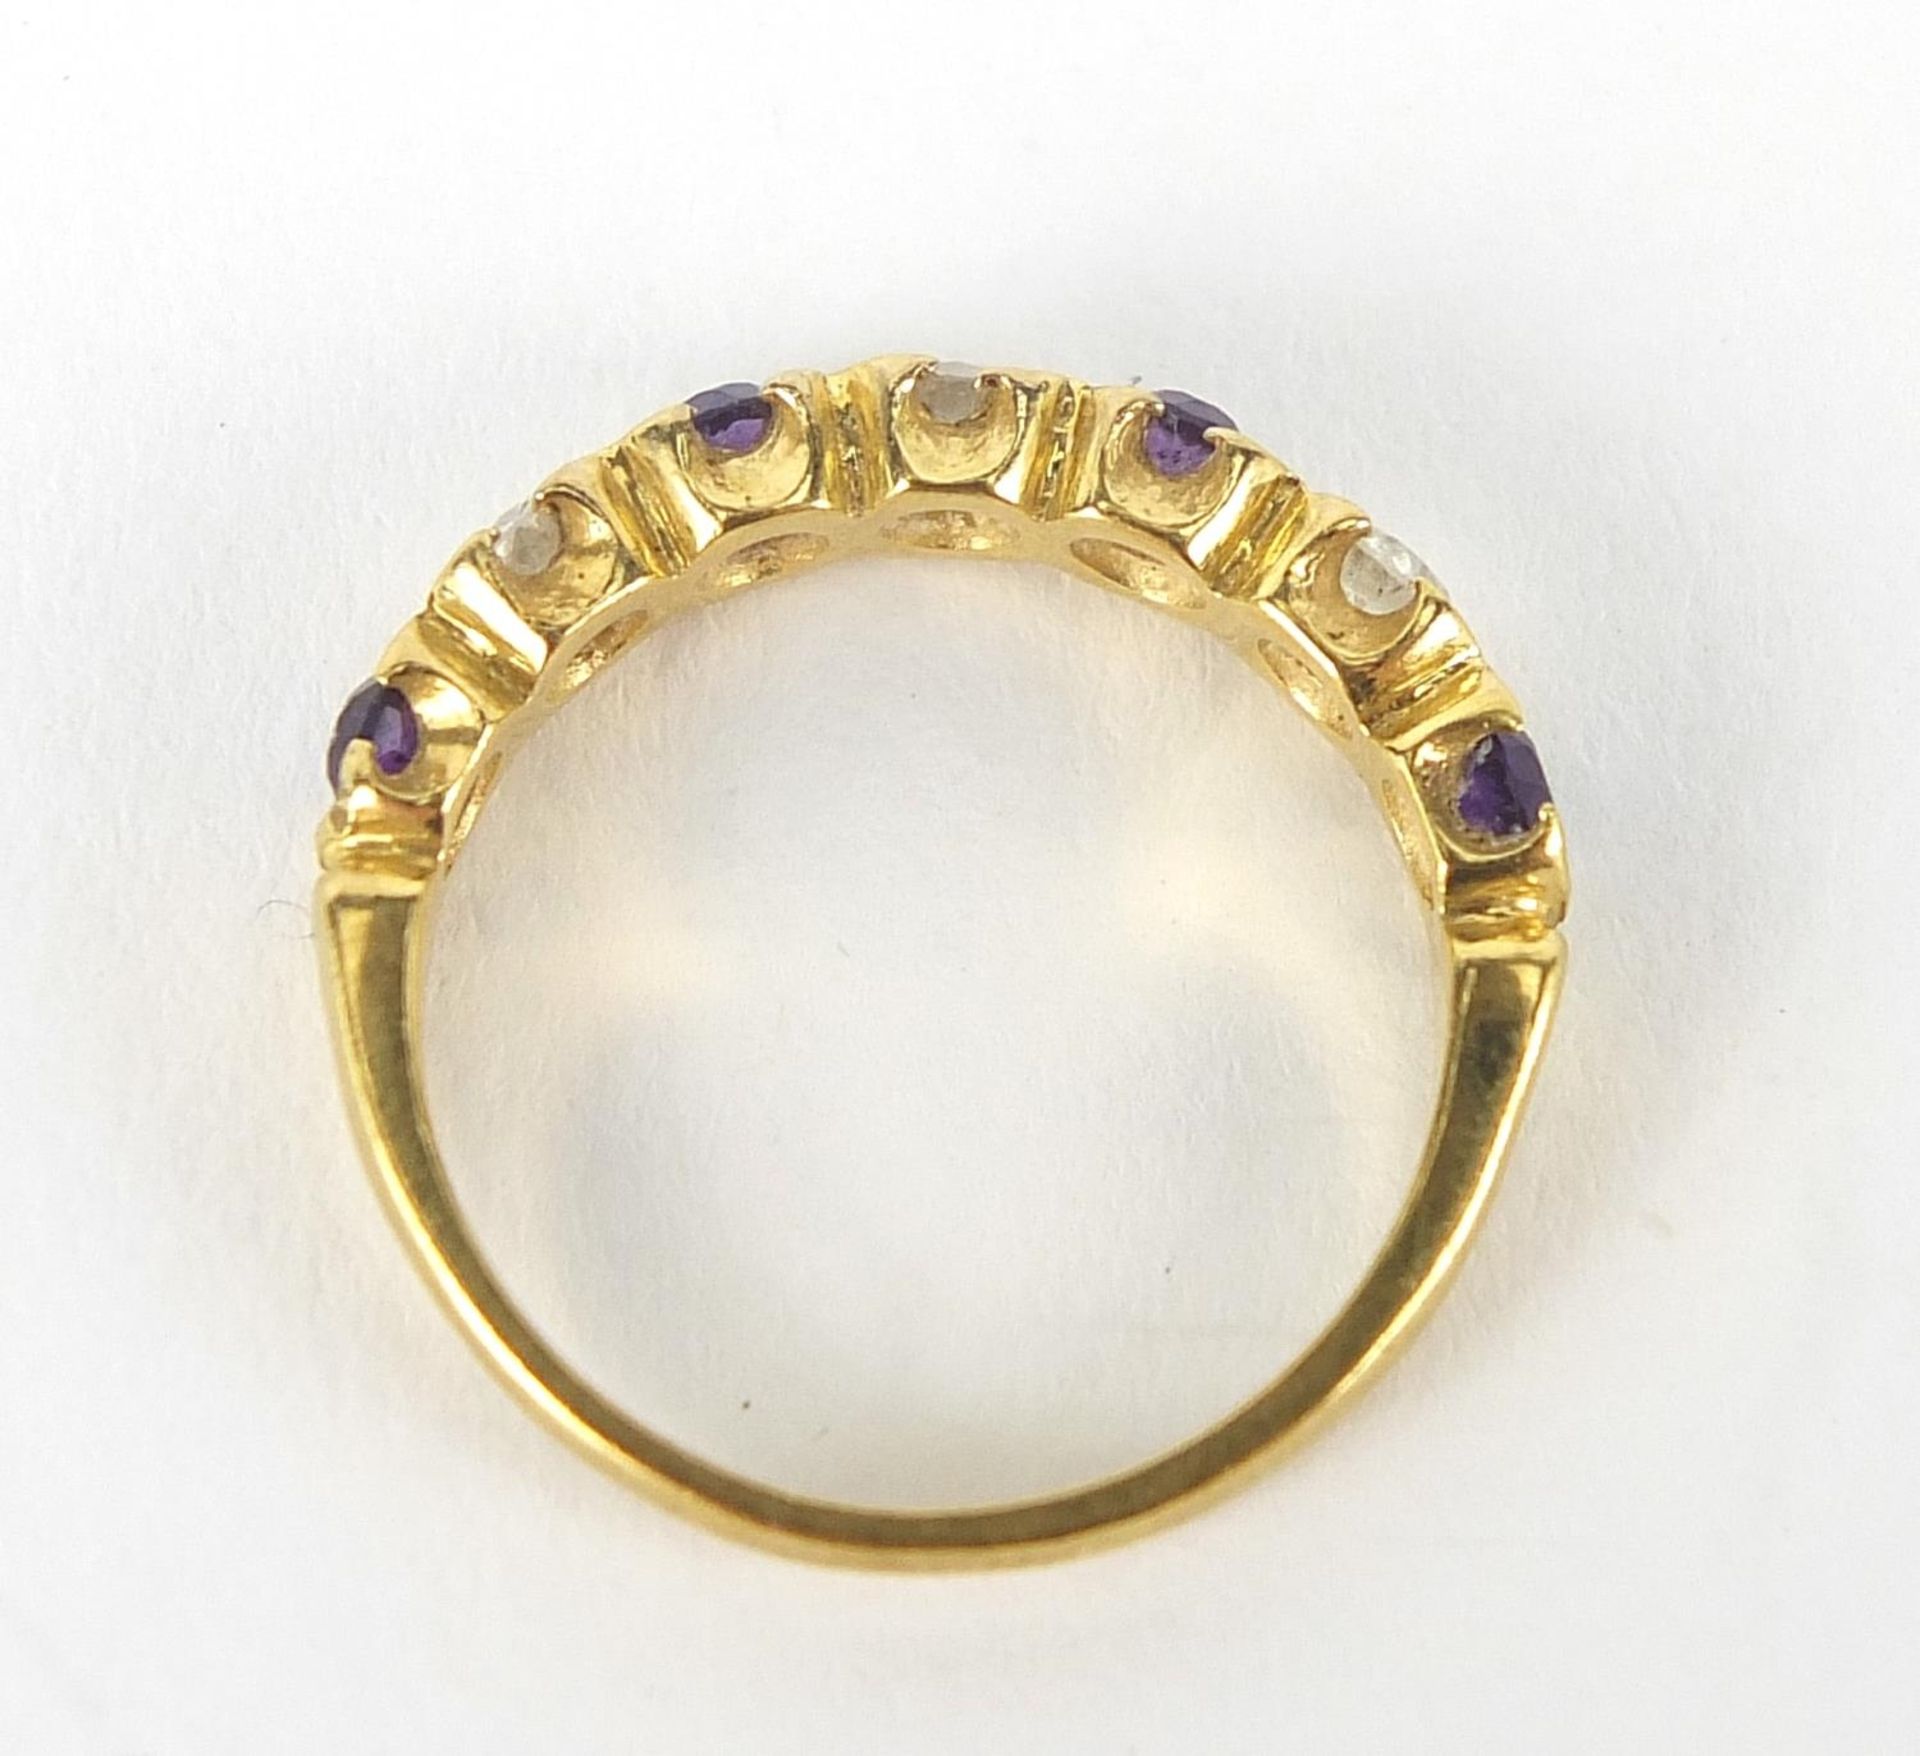 18ct gold diamond and amethyst half eternity ring, the diamonds approximately 2mm in diameter, - Image 6 of 6